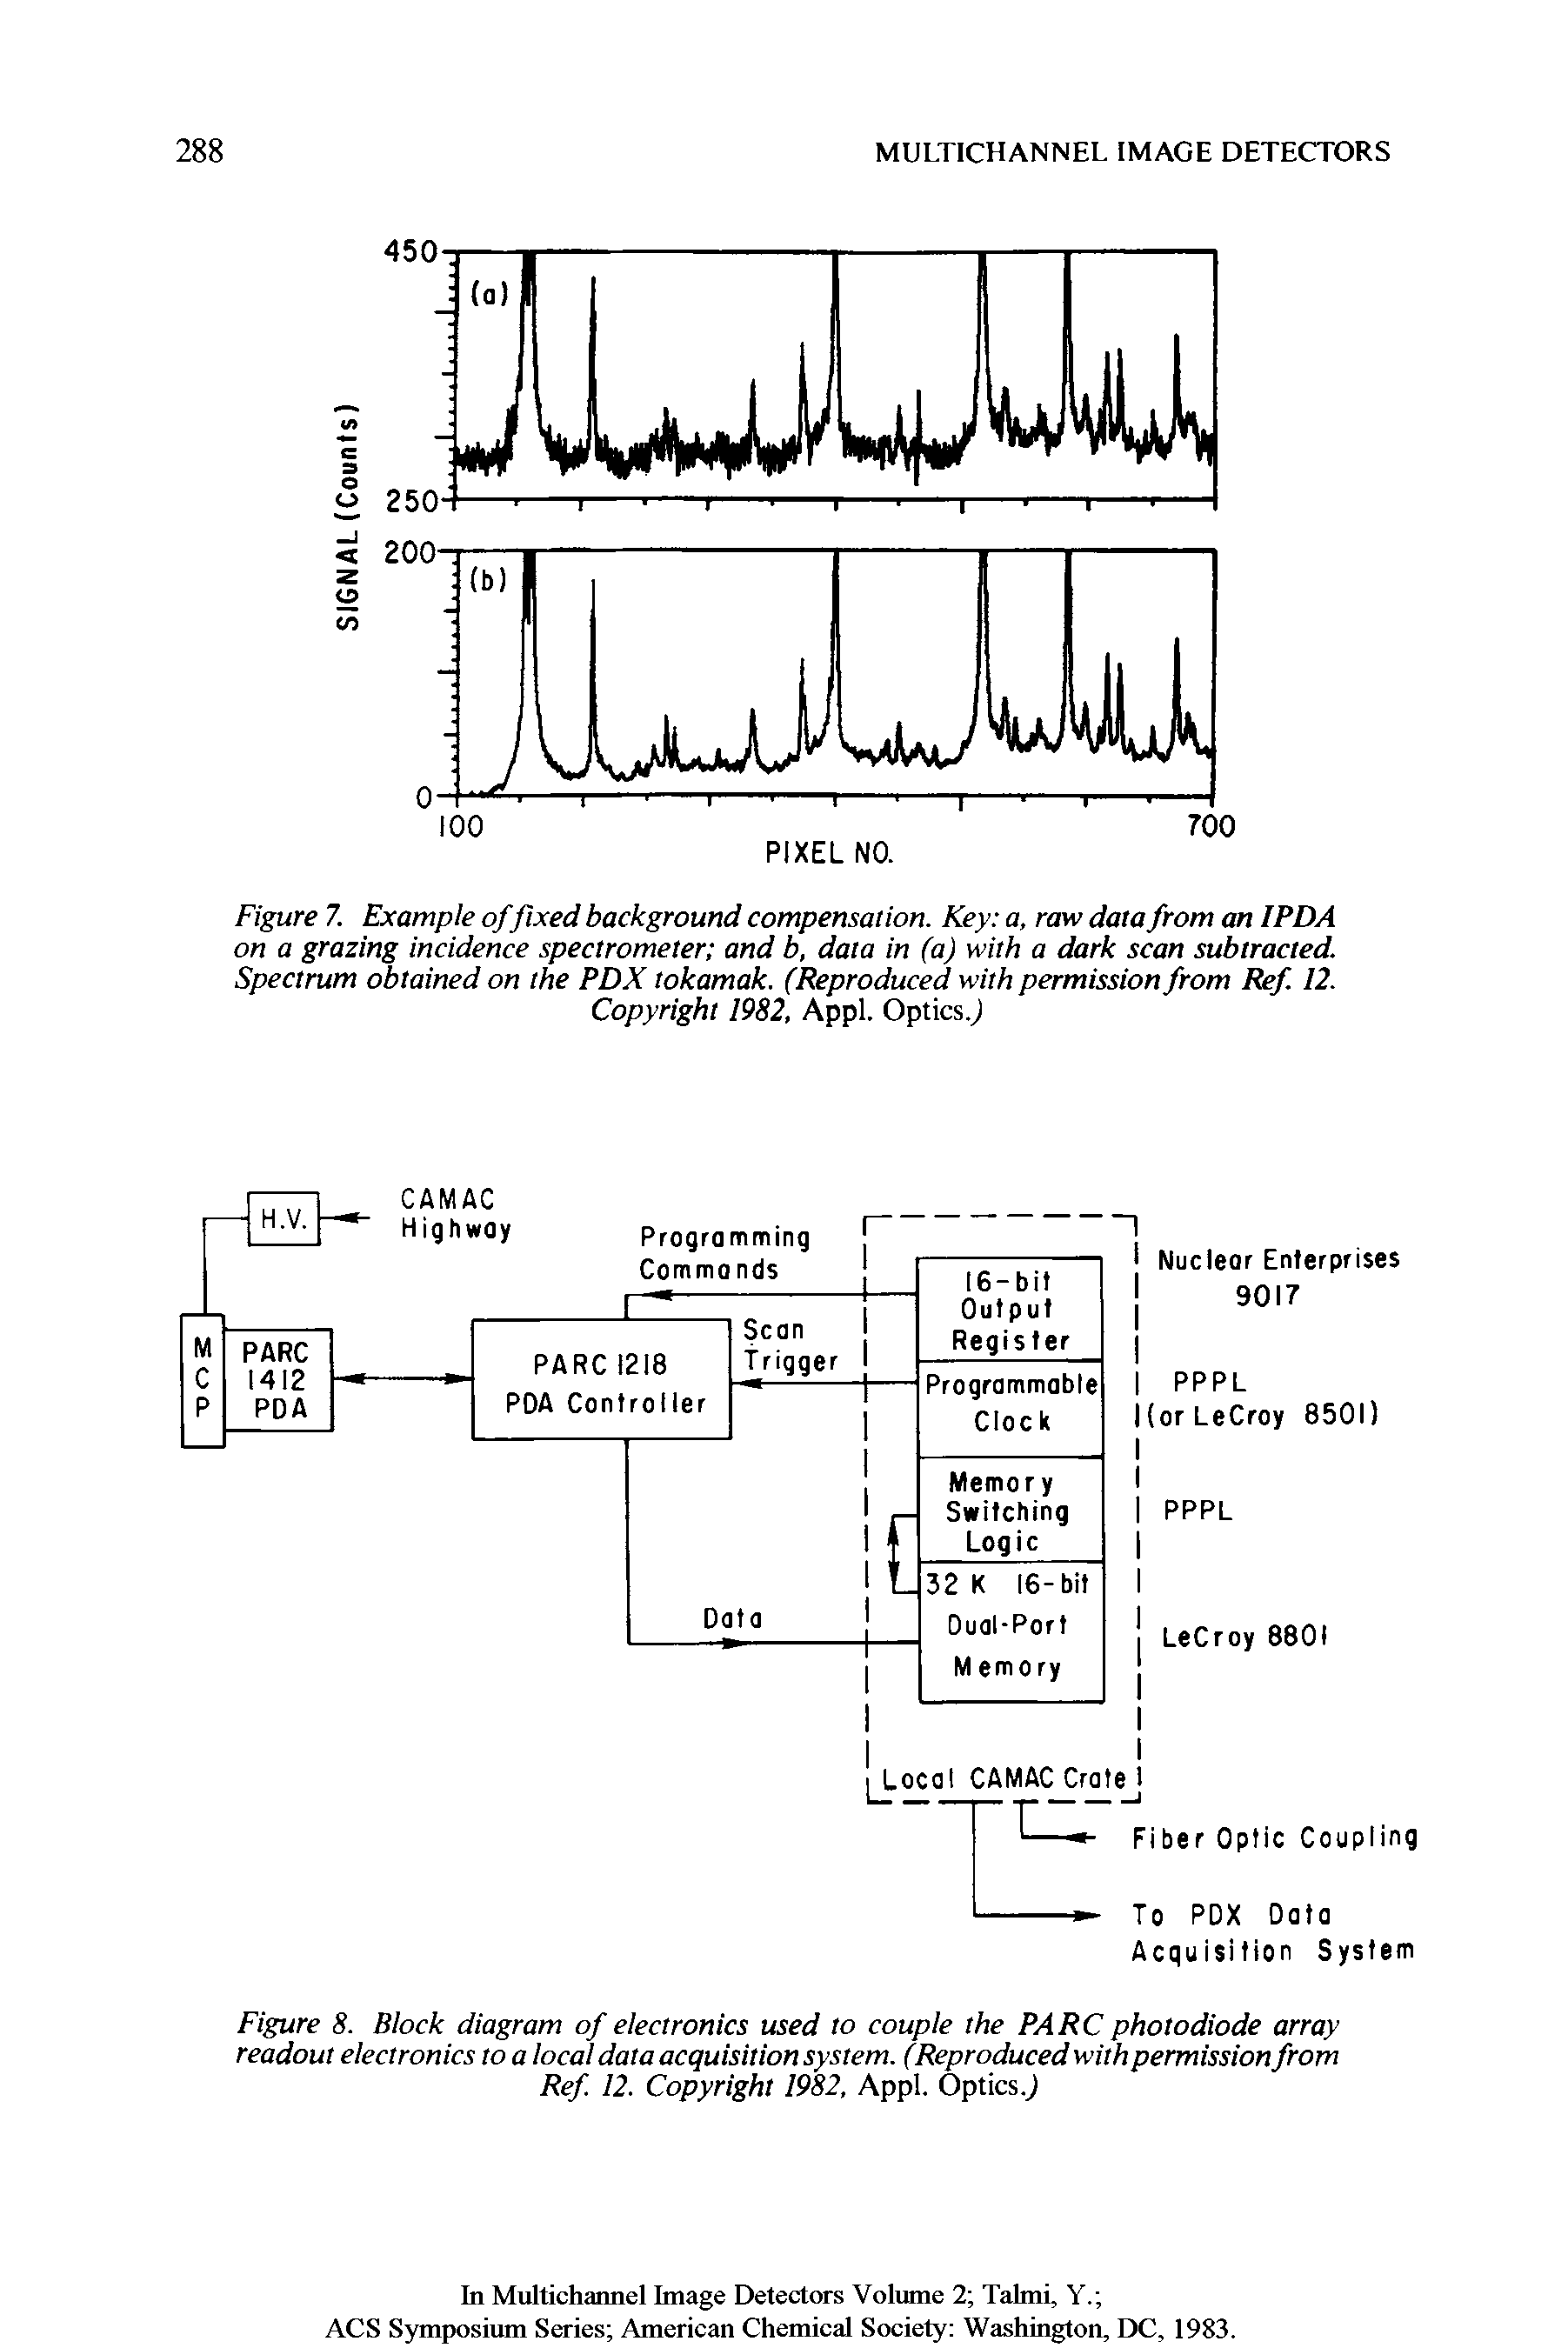 Figure 8. Block diagram of electronics used to couple the PARC photodiode array readout electronics to a local data acquisition system. (Reproduced with permission from Ref. 12. Copyright 1982, Appl. OpticsJ...